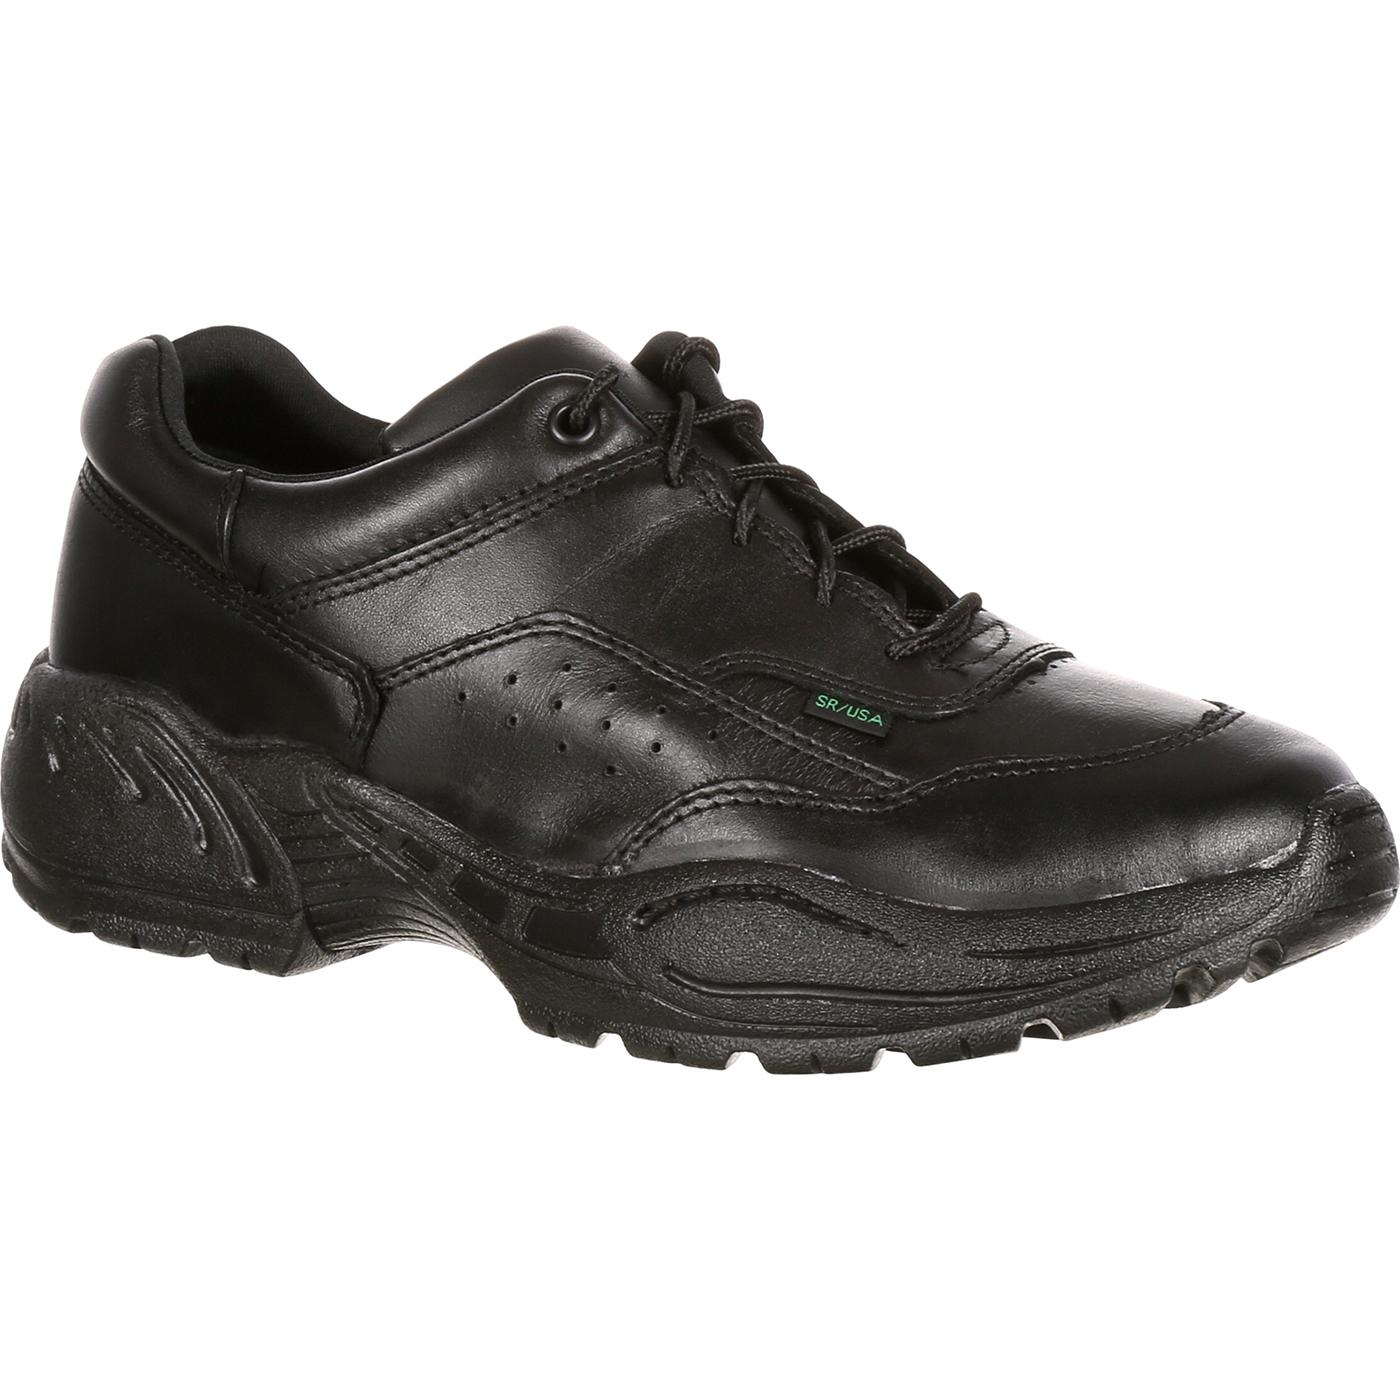 Rocky 911 Athletic Oxford Shoes | Buy Black Rocky 911 Shoes for Public  Service Workers - Rocky Boots